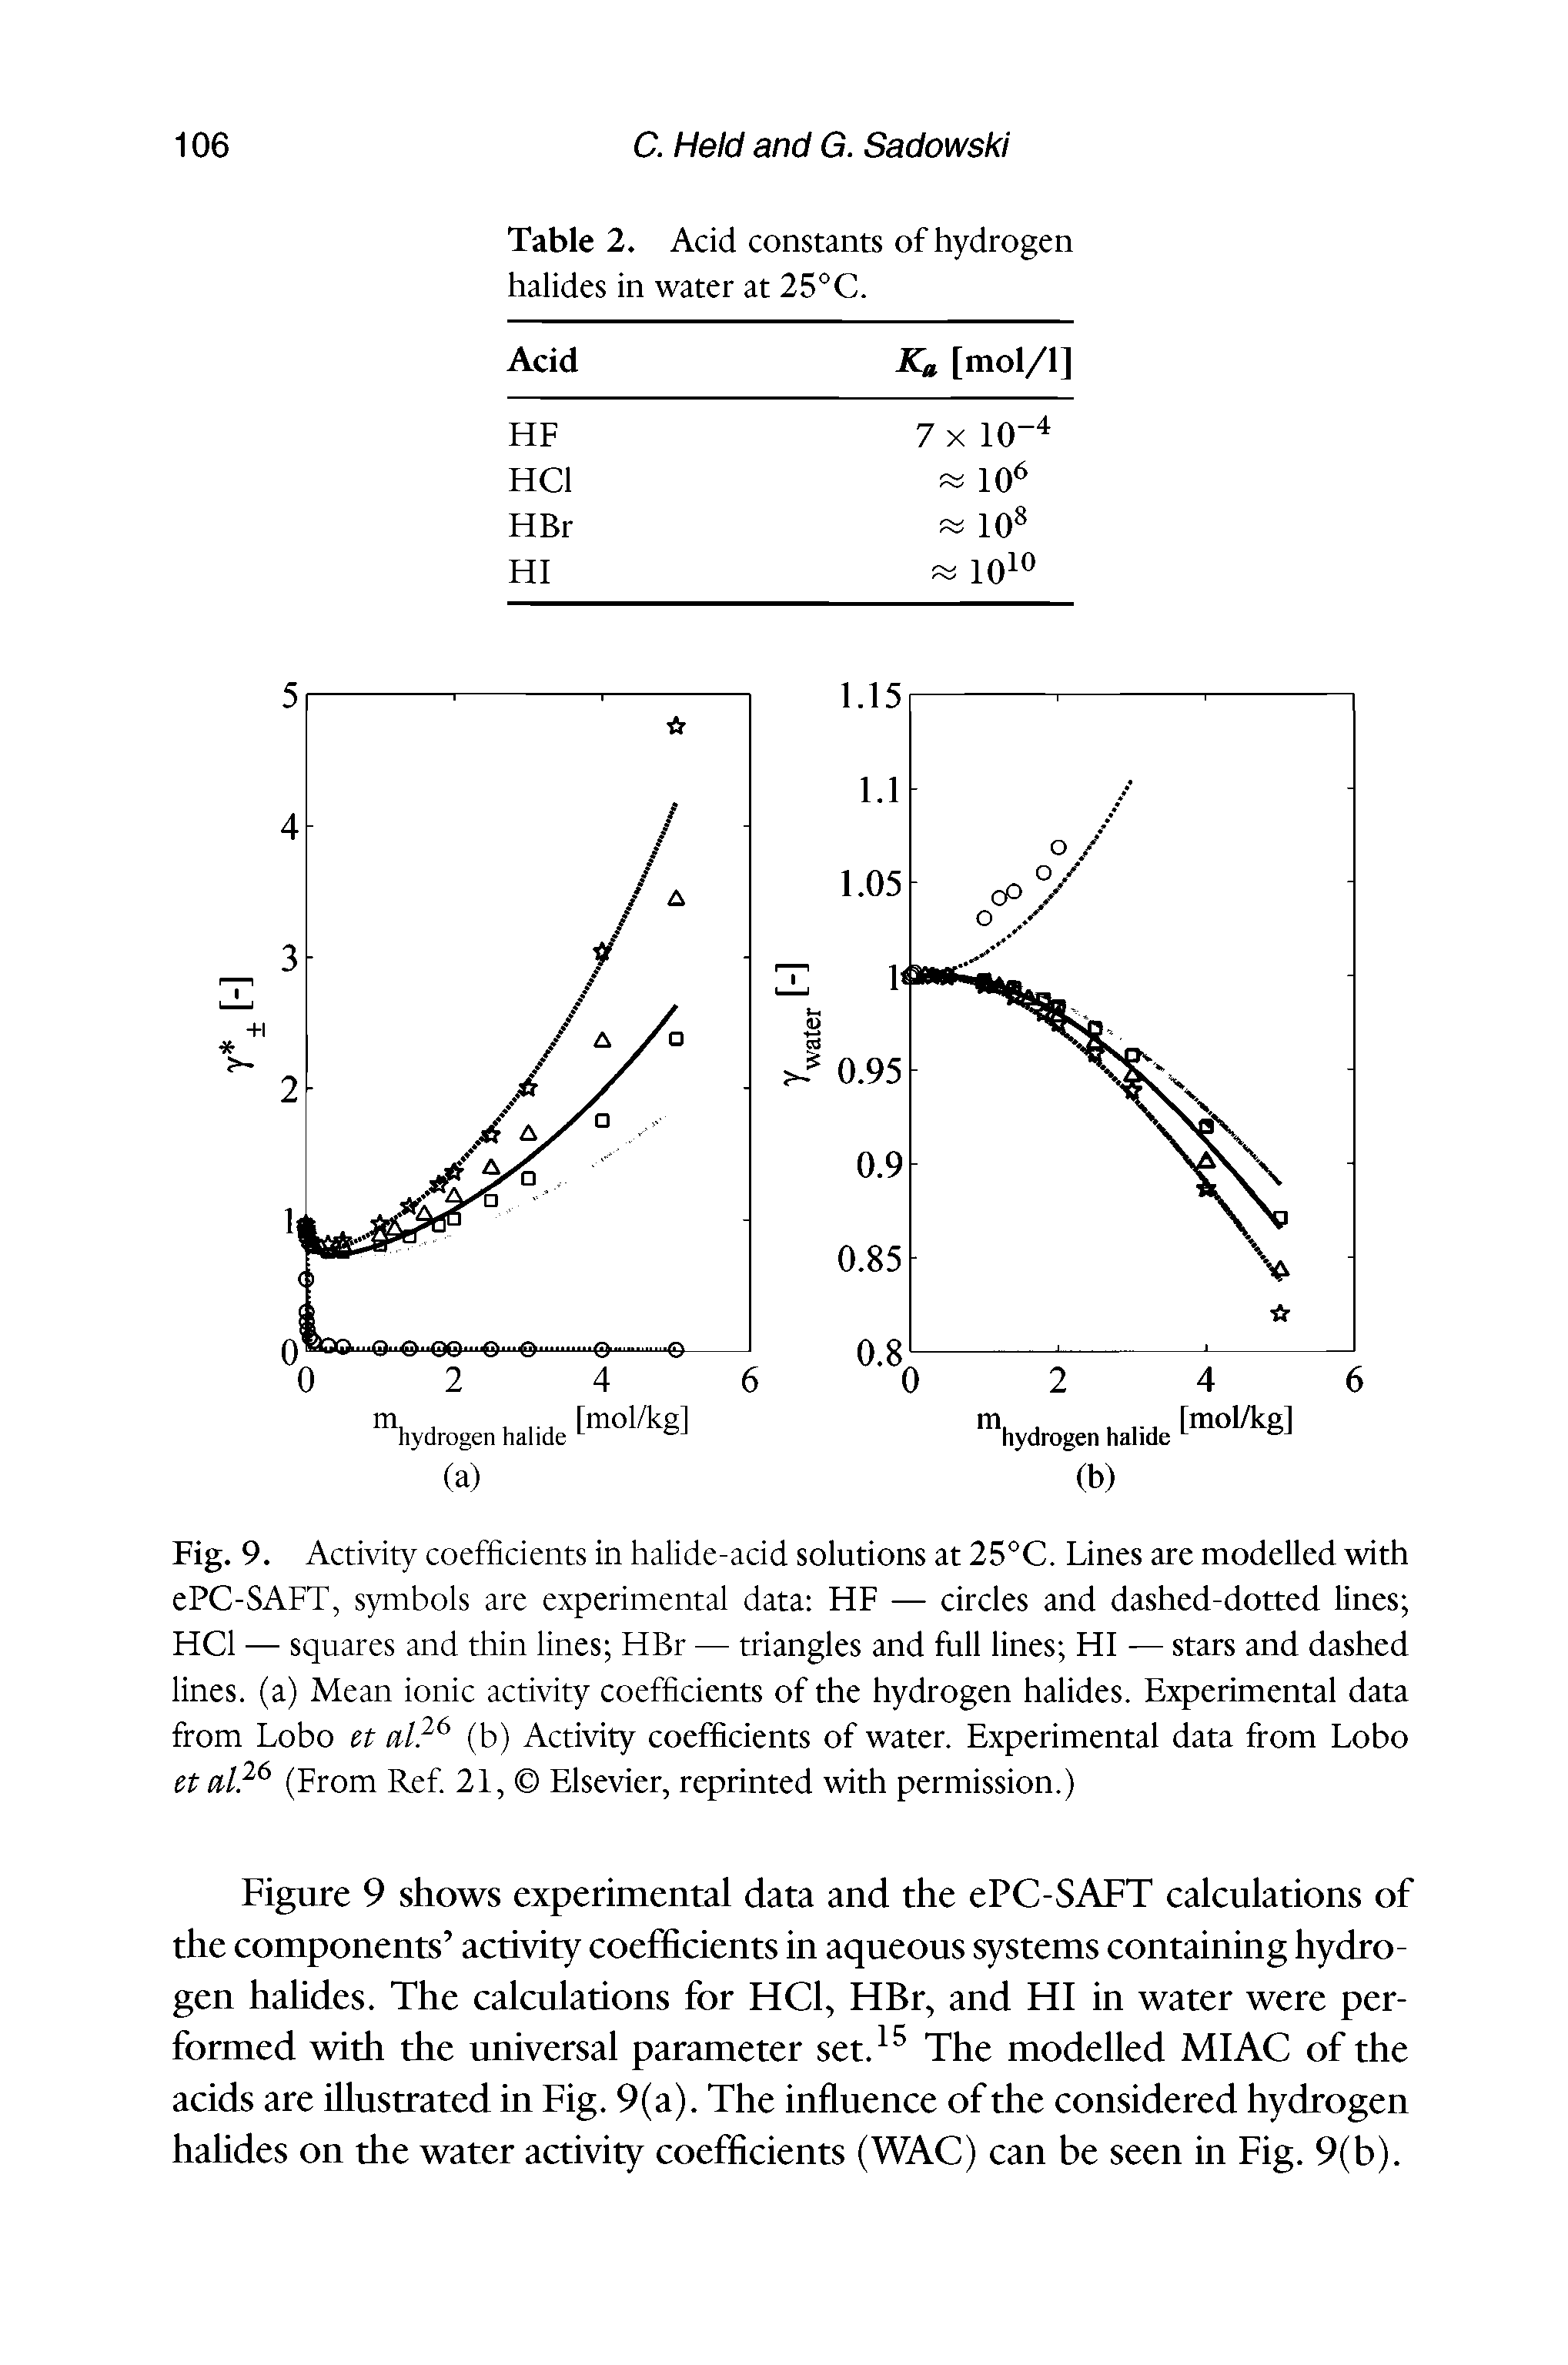 Fig. 9. Activity coefficients in halide-acid solutions at 25°C. Lines are modelled with ePC-SAFT, symbols are experimental data HF — circles and dashed-dotted lines HCl — squares and thin lines HBr — triangles and full lines HI — stars and dashed lines, (a) Mean ionic activity coefficients of the hydrogen halides. Experimental data from Lobo et (b) Activity coefficients of water. Experimental data from Lobo ct (From Ref 21, Elsevier, reprinted with permission.)...